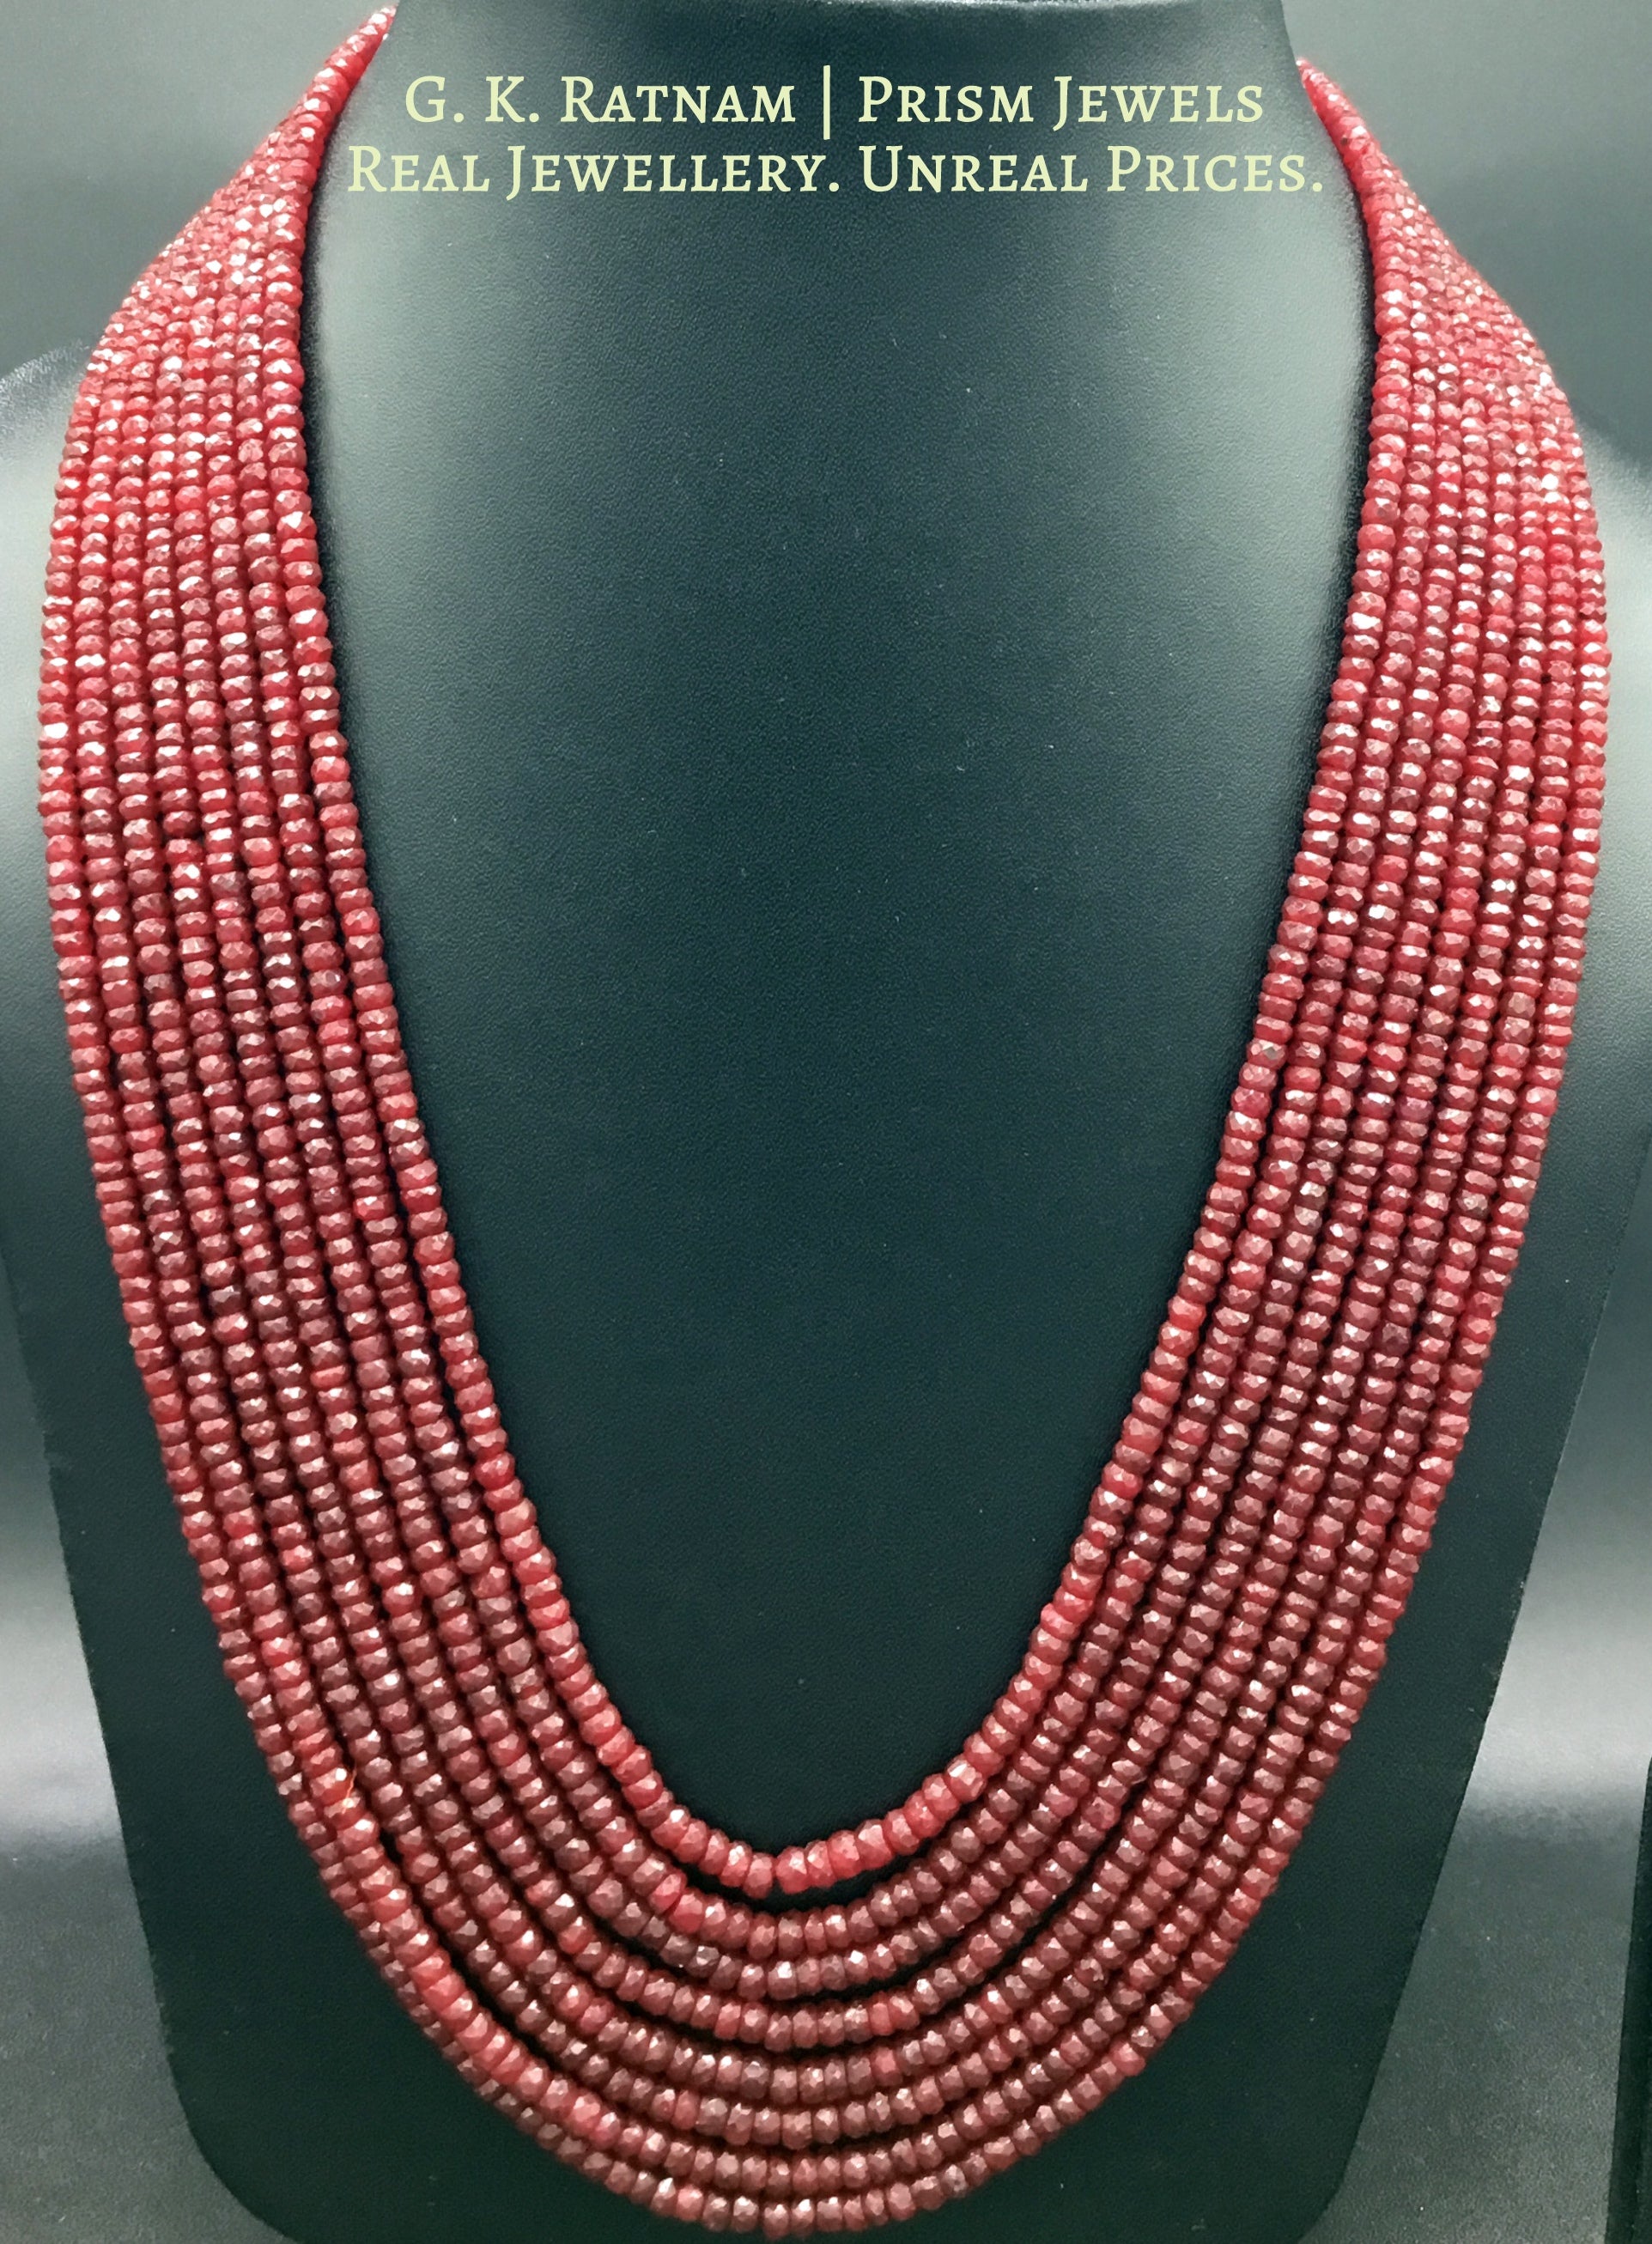 Natural (heat-treated) cut Rubies 8 line Necklace - G. K. Ratnam